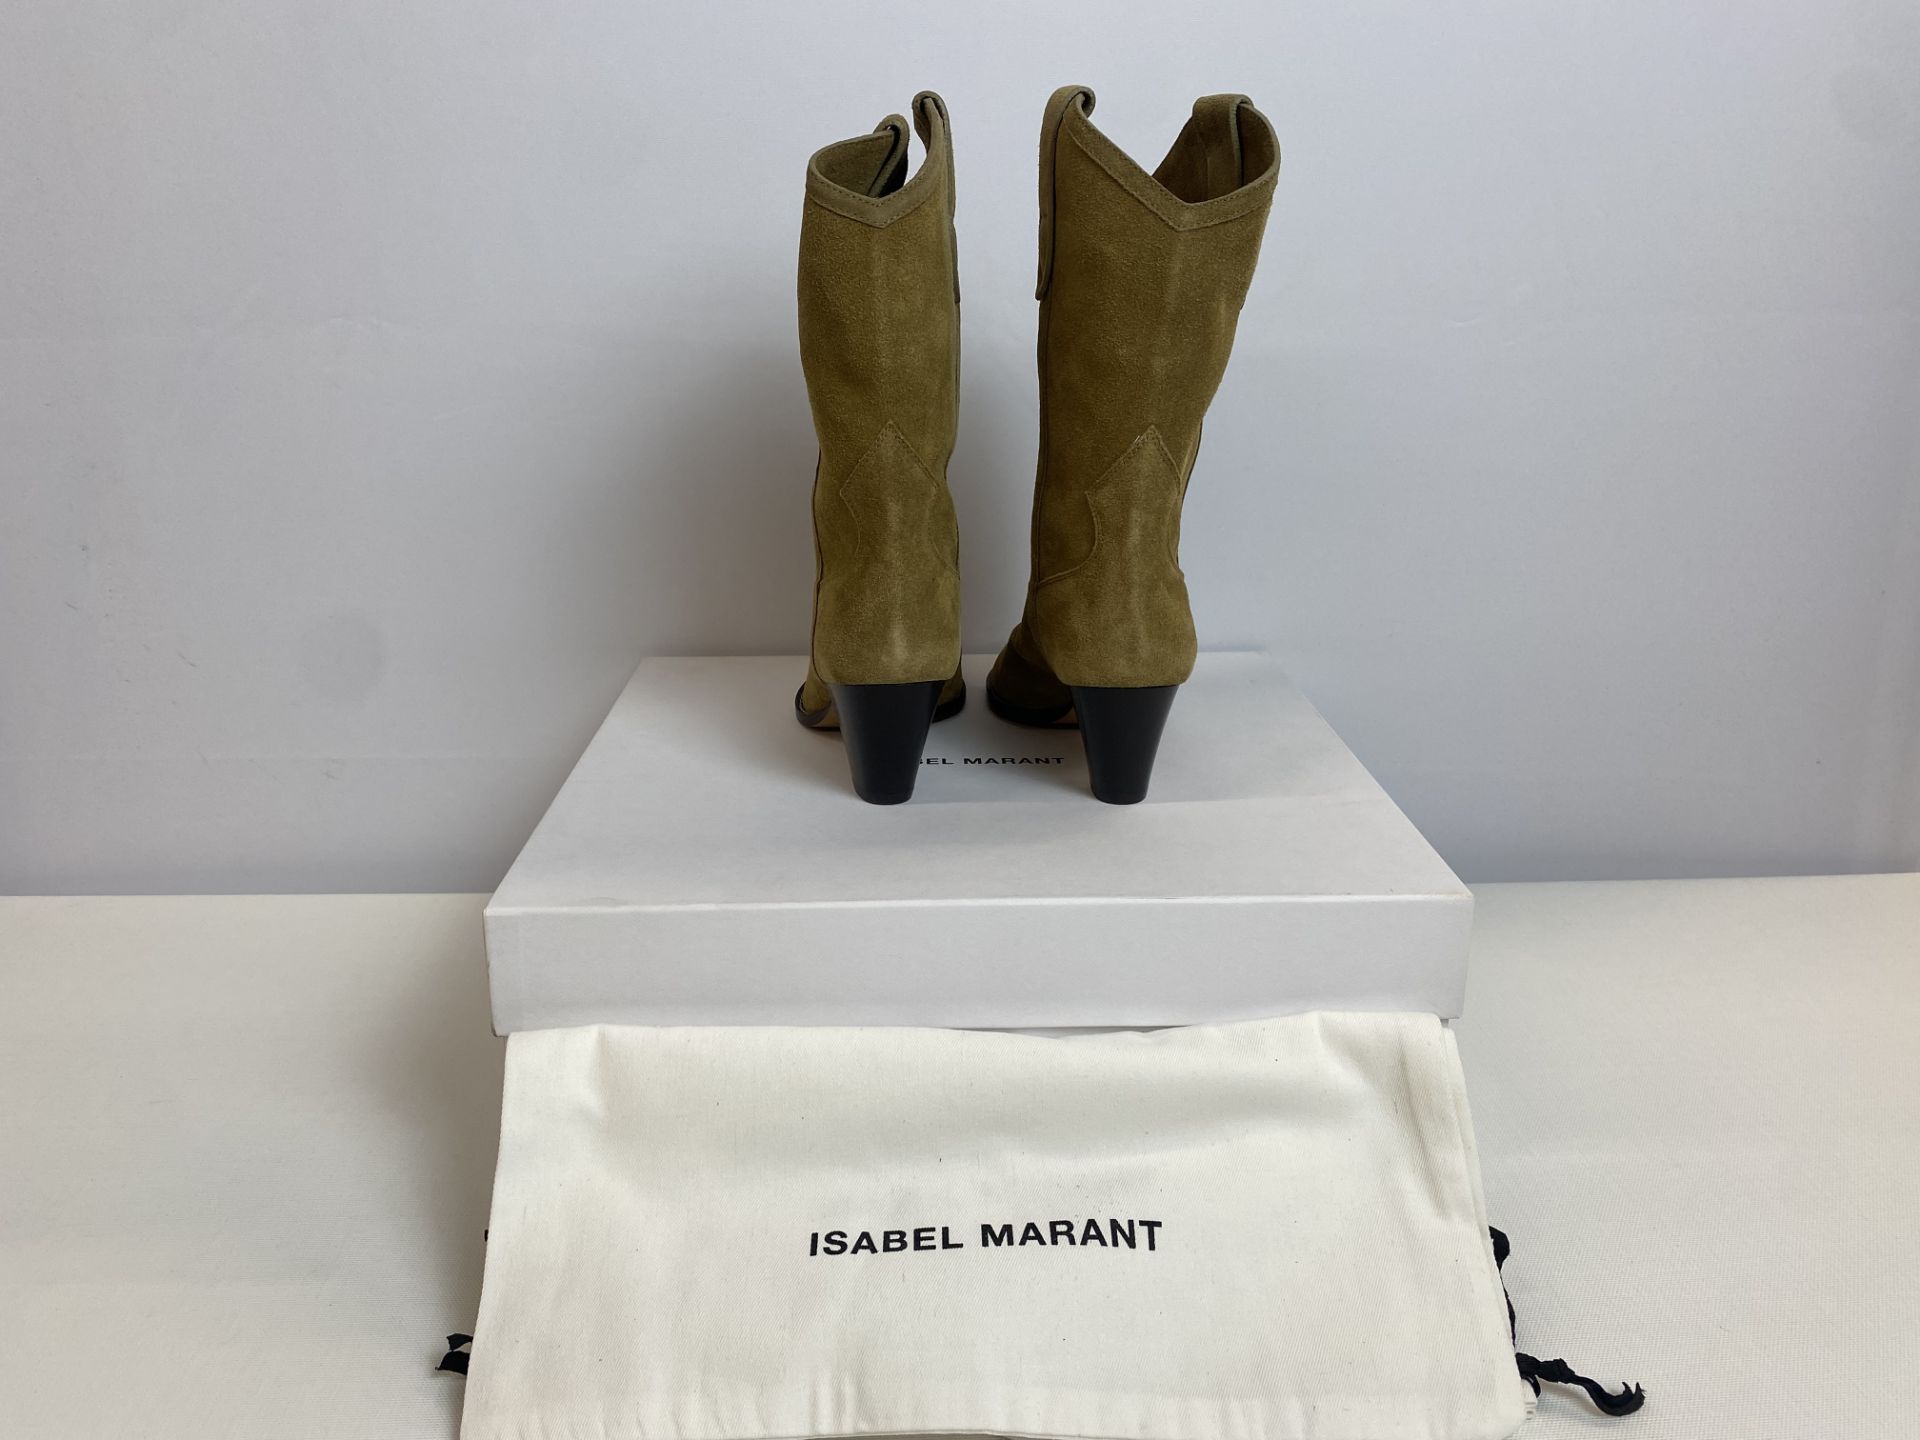 Isabel Marant Boot Luliette Suede Boot Feminine Size: 37 Taupe, Retail Price: $1250 - Image 2 of 4